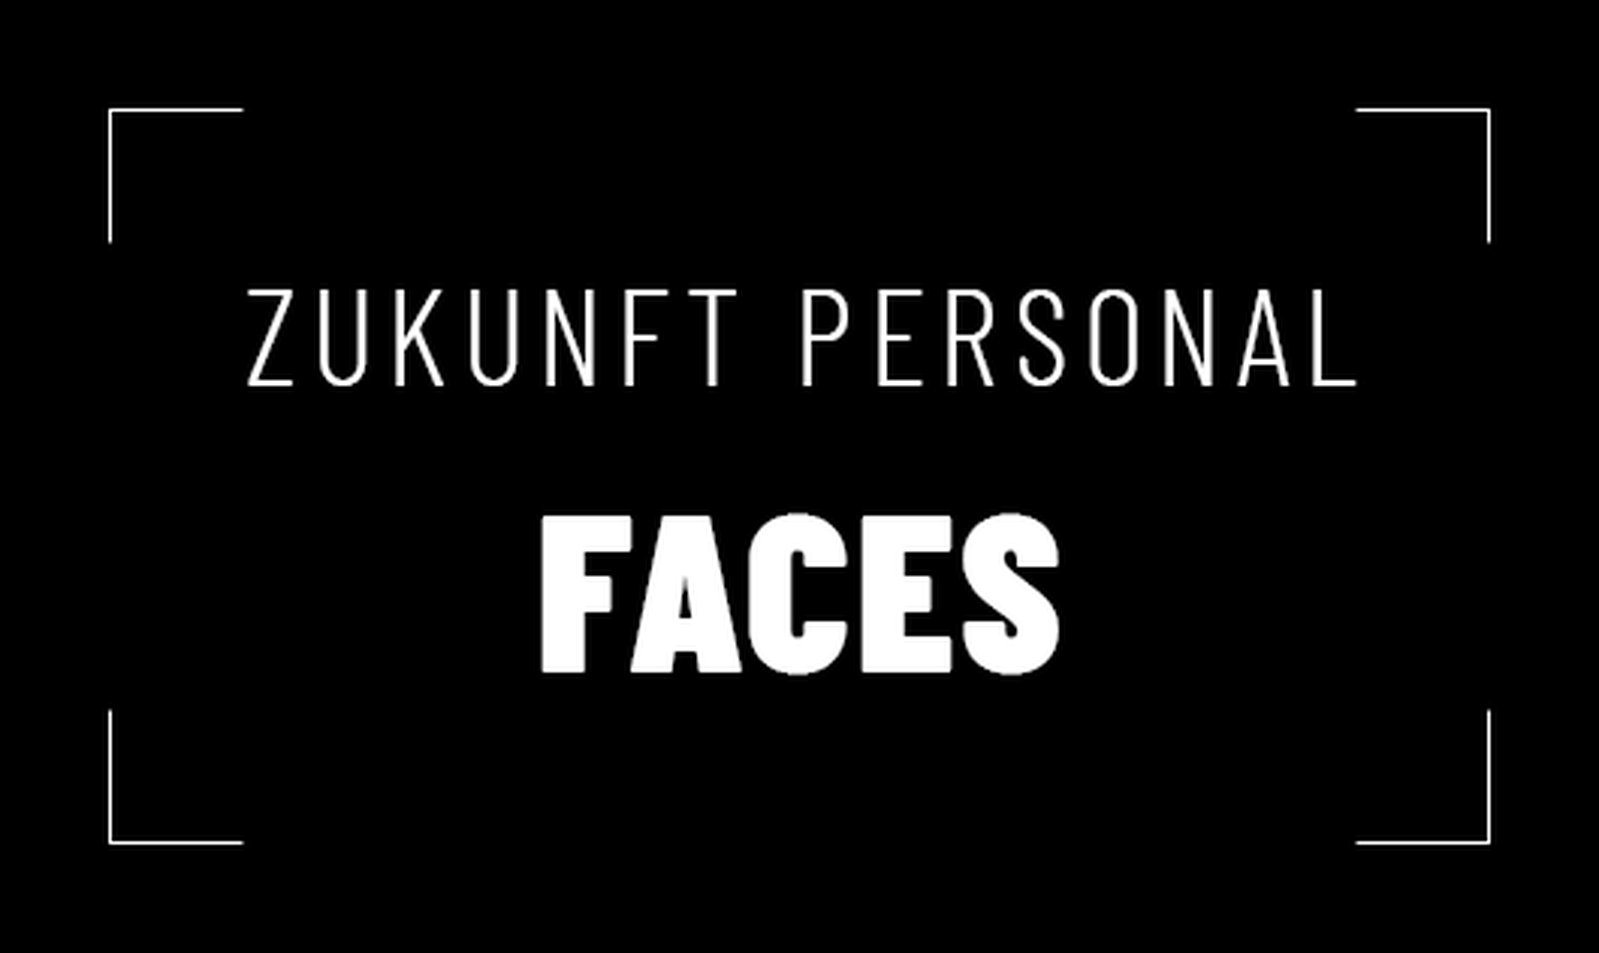 Zukunft Personal Faces